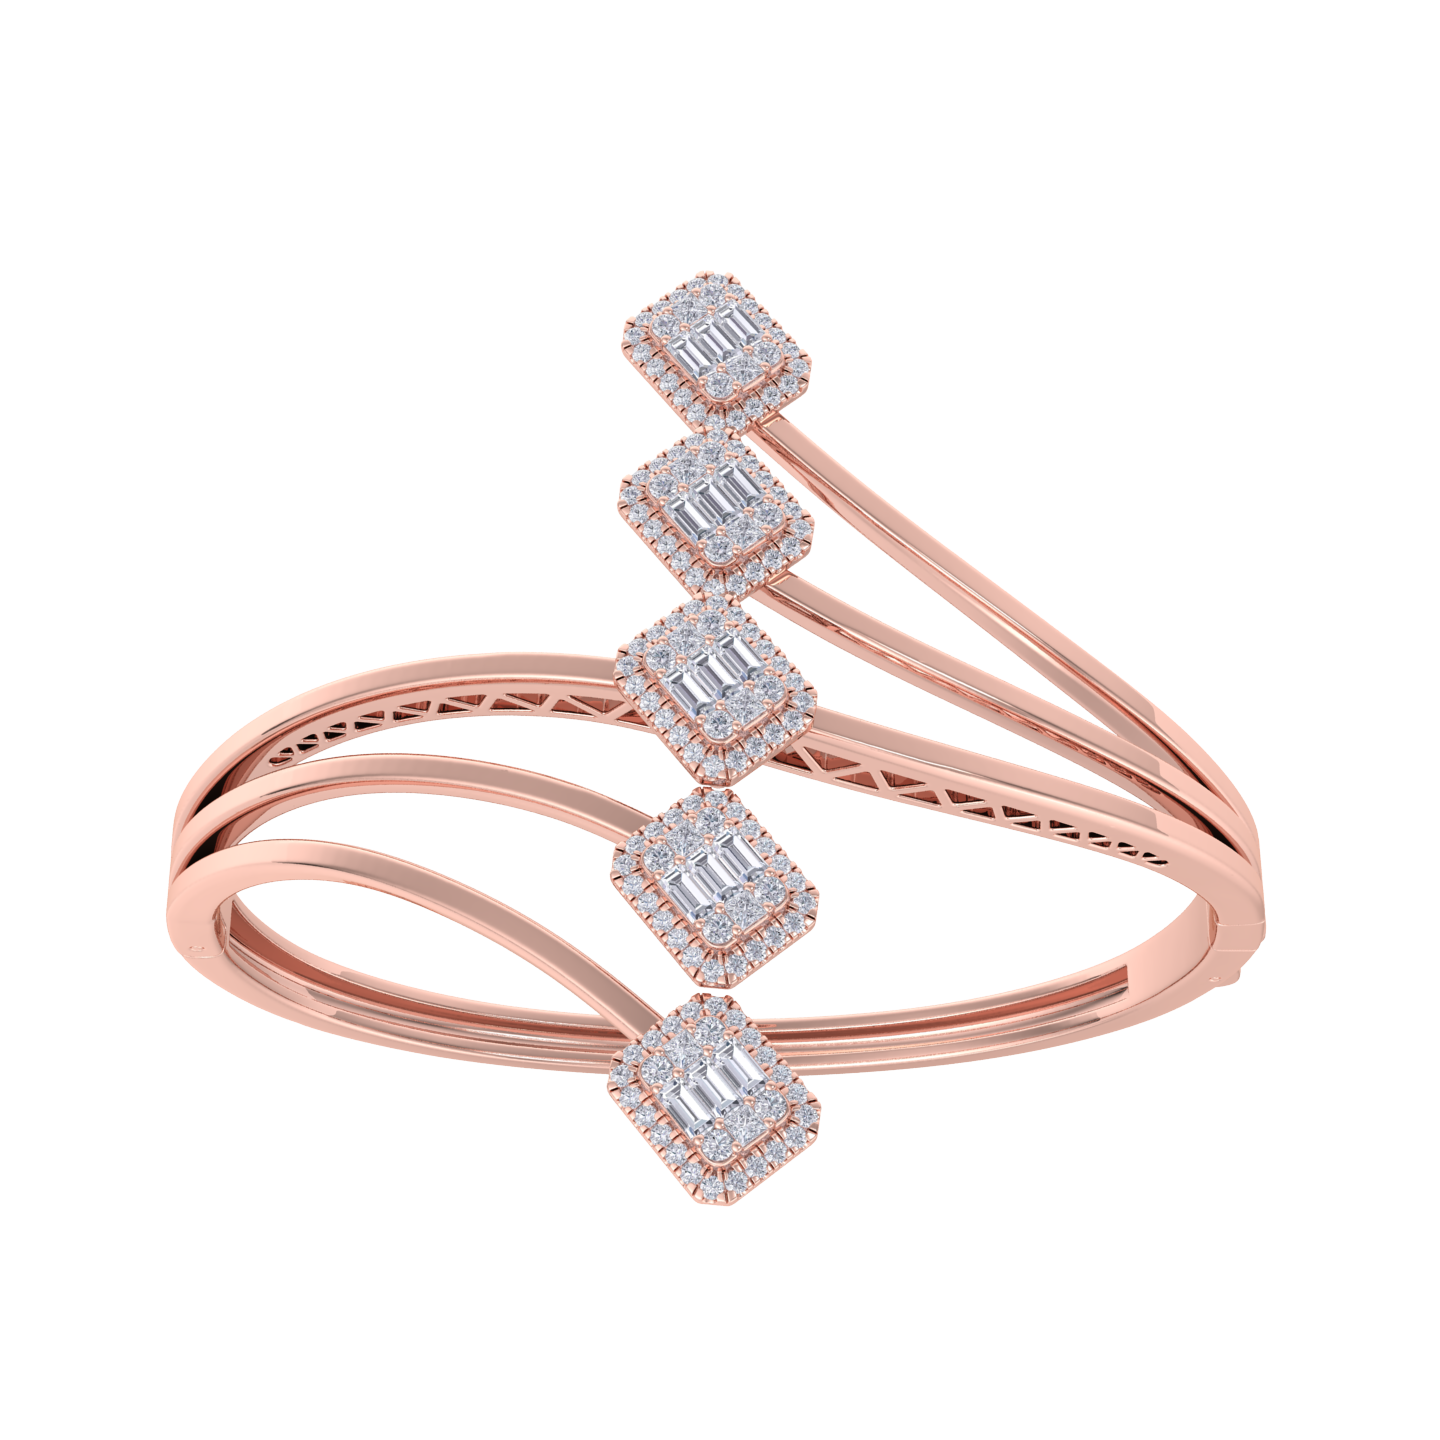 Diamond bracelet in rose gold with white diamonds of 3.26 ct in weight